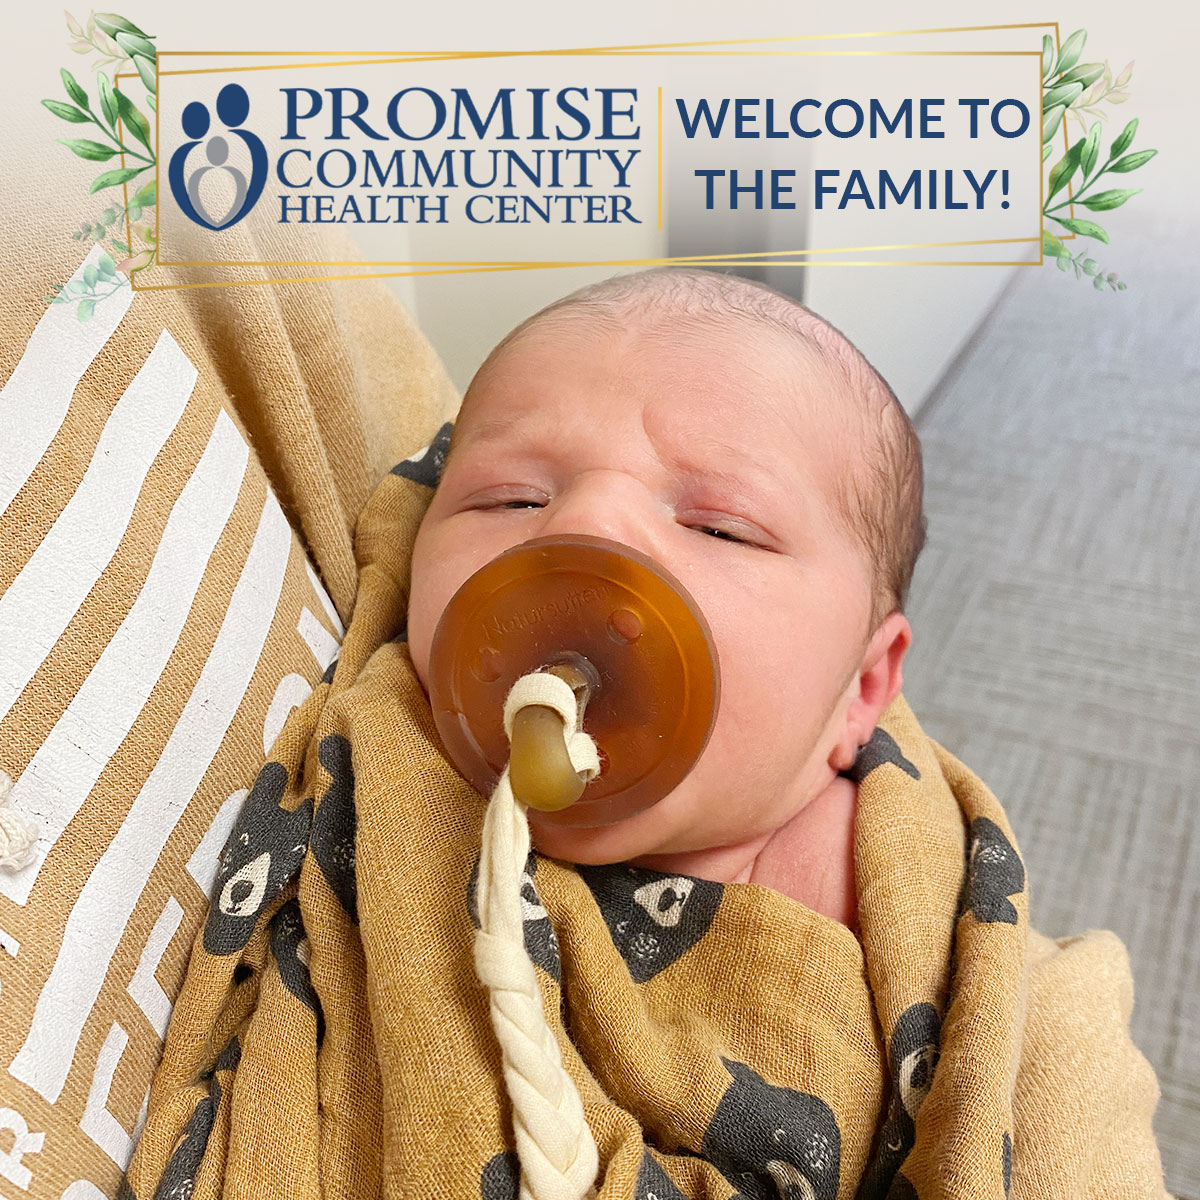 The De Jong family Sioux Falls, SD homebirth |Promise Community Health Center in Sioux Center, Iowa | Home births in northwest Iowa, Home births in southeast South Dakota, Home births in southwest Minnesota | Home births in Sioux Falls South Dakota, Home births in Beresford South Dakota, Home births in Sioux City IA, Home births in LeMars IA, Home births in Worthington MN, Home births in Iowa, Home births in South Dakota, Home births in Minnesota